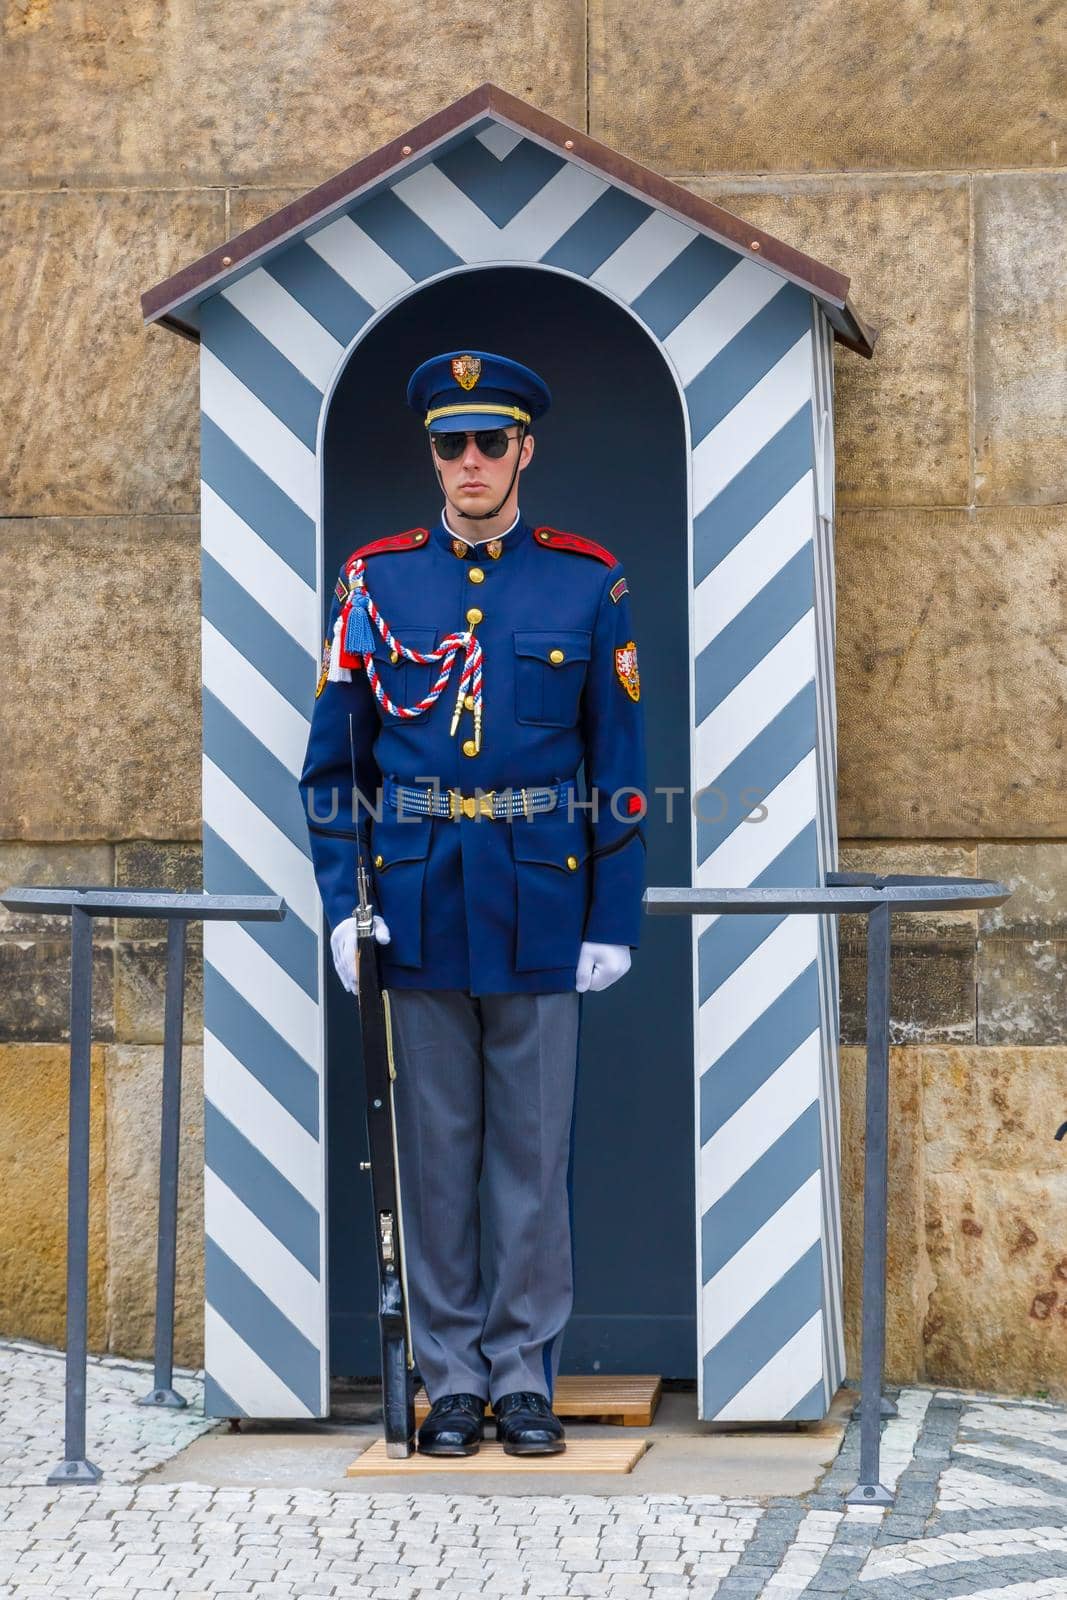 Changing of the guard at the post of honor in the Czech Republic. Suitable for men in military uniform. Prague, Czech Republic April 14, 2018